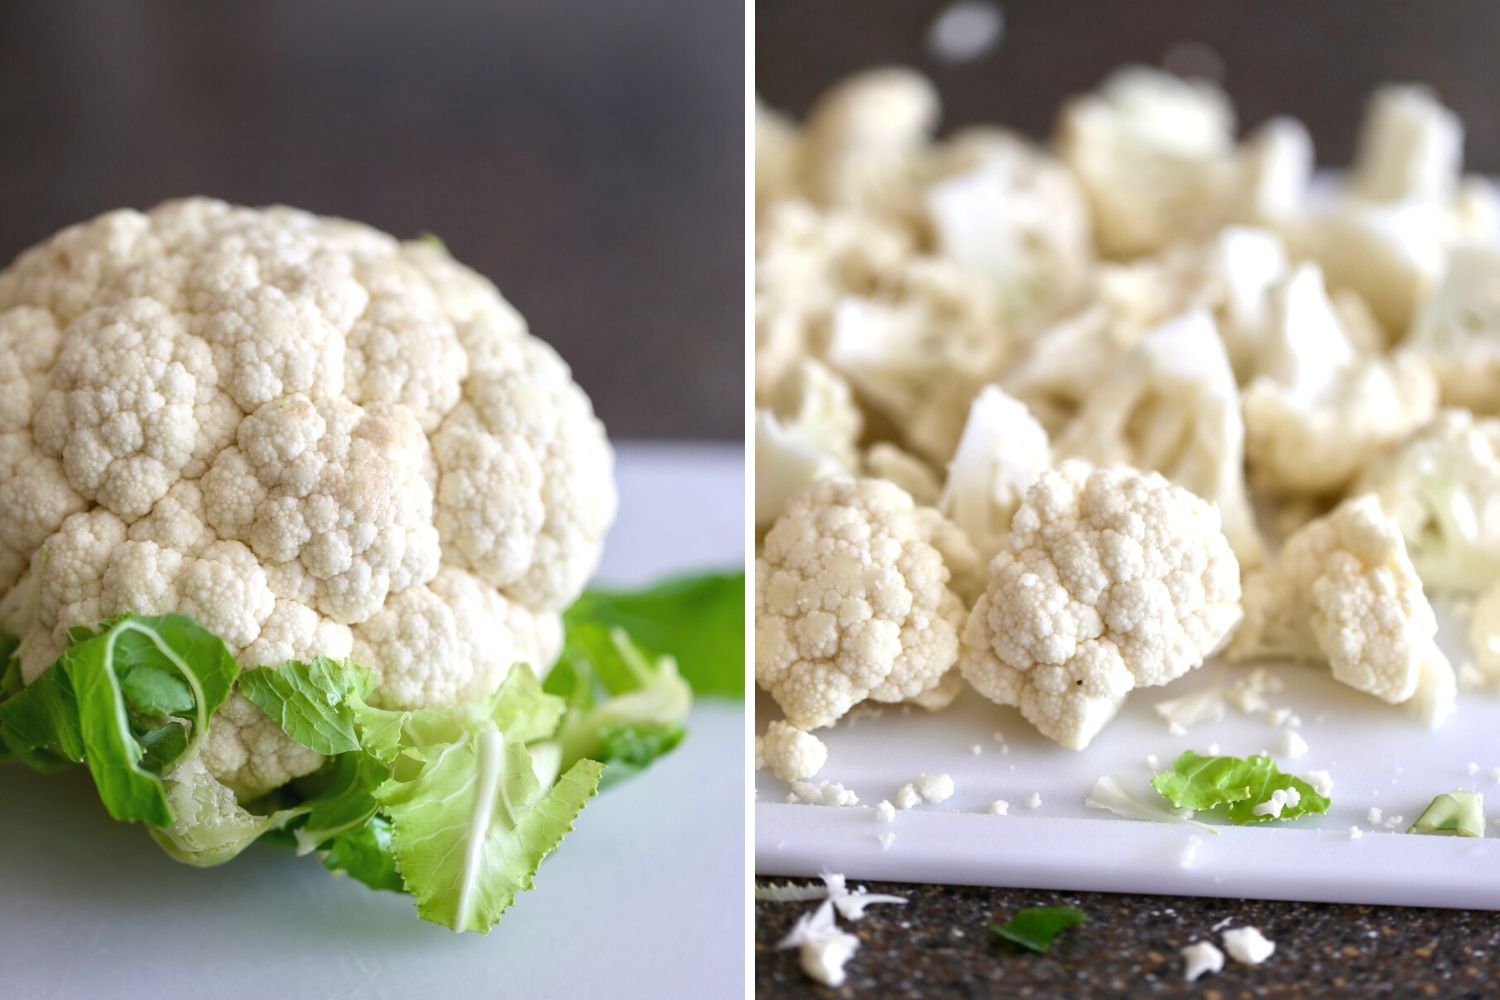 a head of cauliflower before and after cutting into "wings"